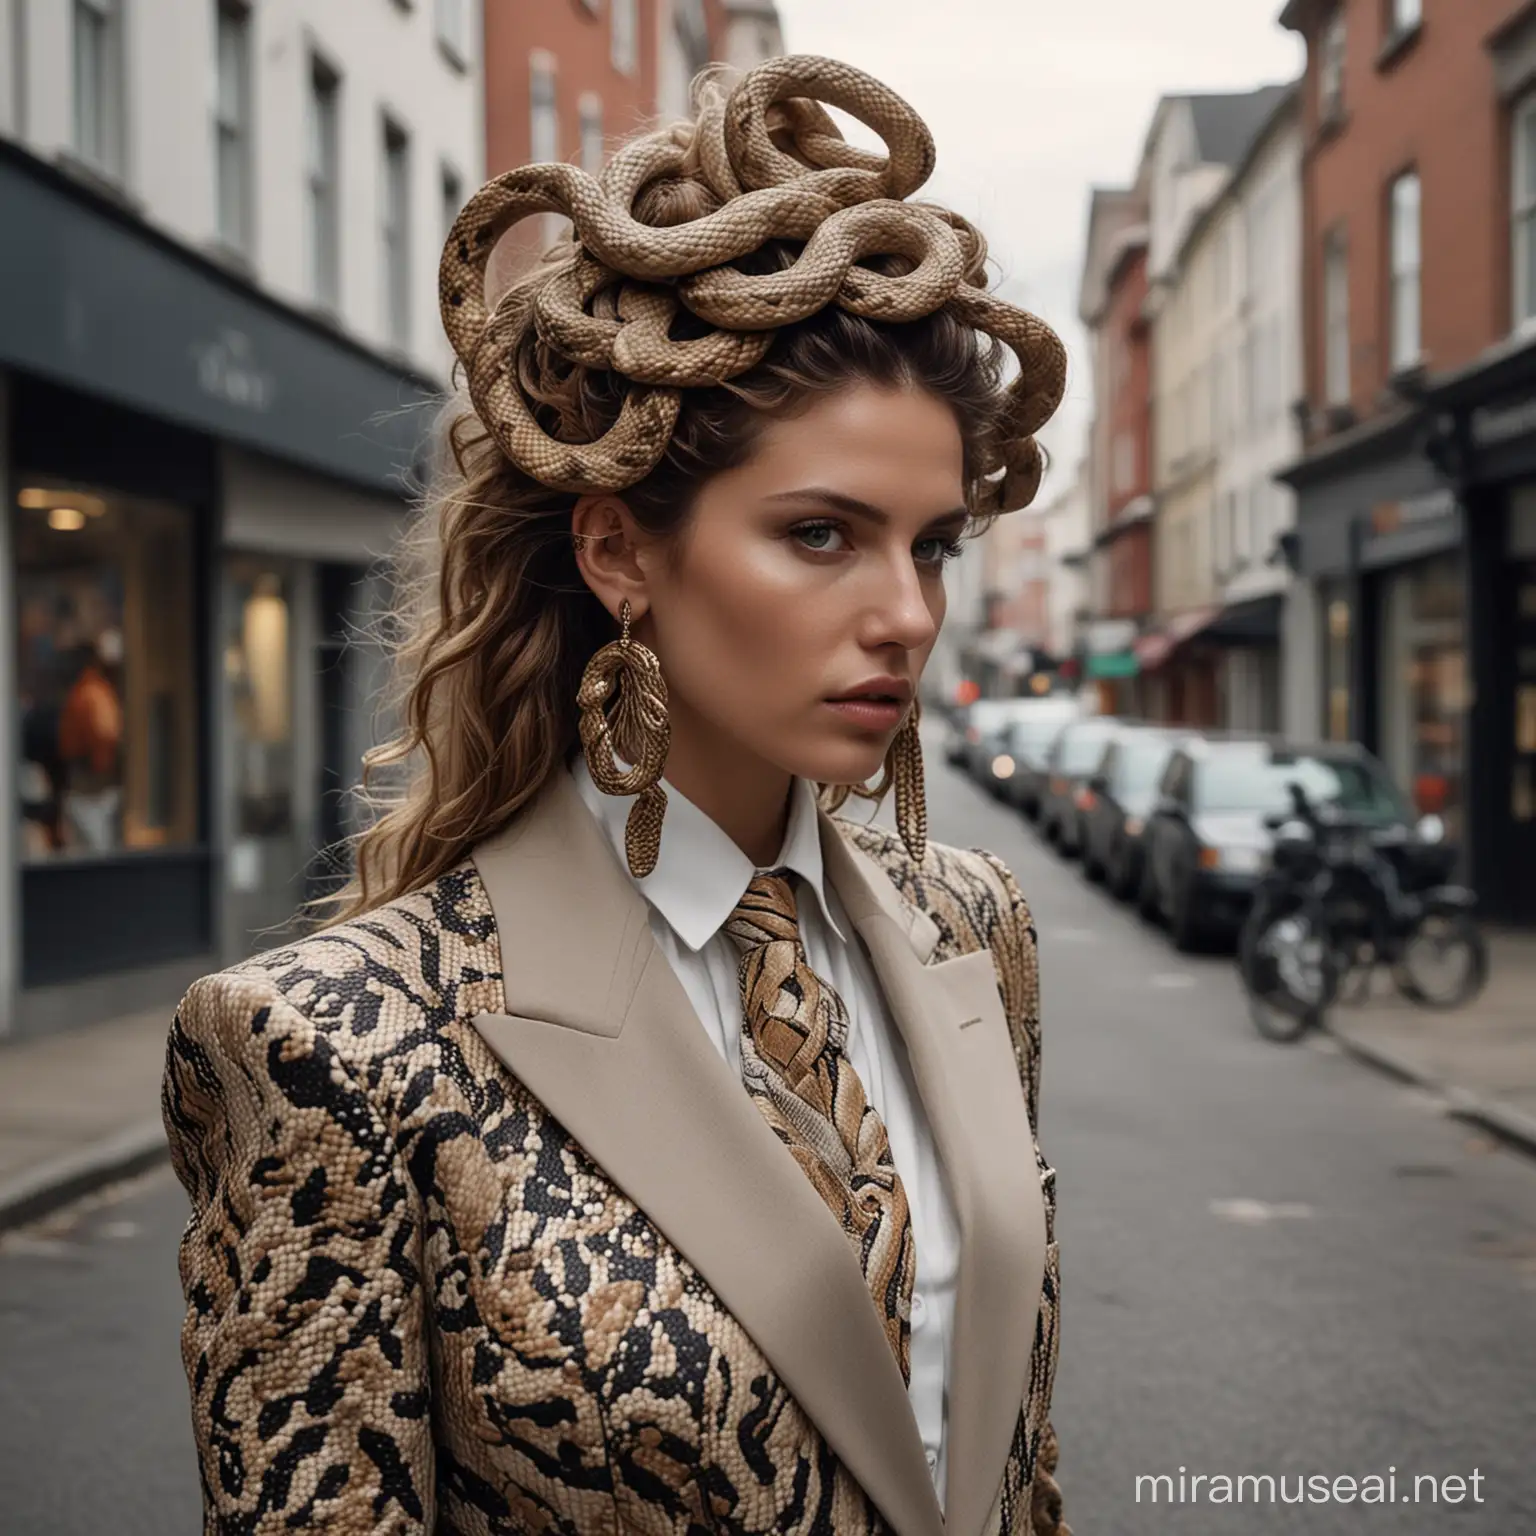 1980's cinematic scene, style of vogue fashion shoot, image capturing the entire body, captured by sony alpha a7 III camera, a contemporary woman walks down a street, she wears a feminine suit, her earrings are in the shape of snakes and which are made out of  hair, she casts an empowered gaze 

I am currently in the process of creating a wearable artwork which fuses elements from the Medusa myth, Swedish mourning jewelry made from human hair, and contemporary street safety, as a continuation of my research into escaping the gaze. The artwork takes the form of snakes, woven out of human hair. When worn on the head, they evoke Medusa, offering a talismanic form of protection by recalling her petrifying gaze.

Offering empowerment, personal agency, and the reclamation of public space, the work challenges the male gaze and traditional gender dynamics. I wish for the work to open up for conversation on women's experiences, safety, and autonomy within societal power dynamics.